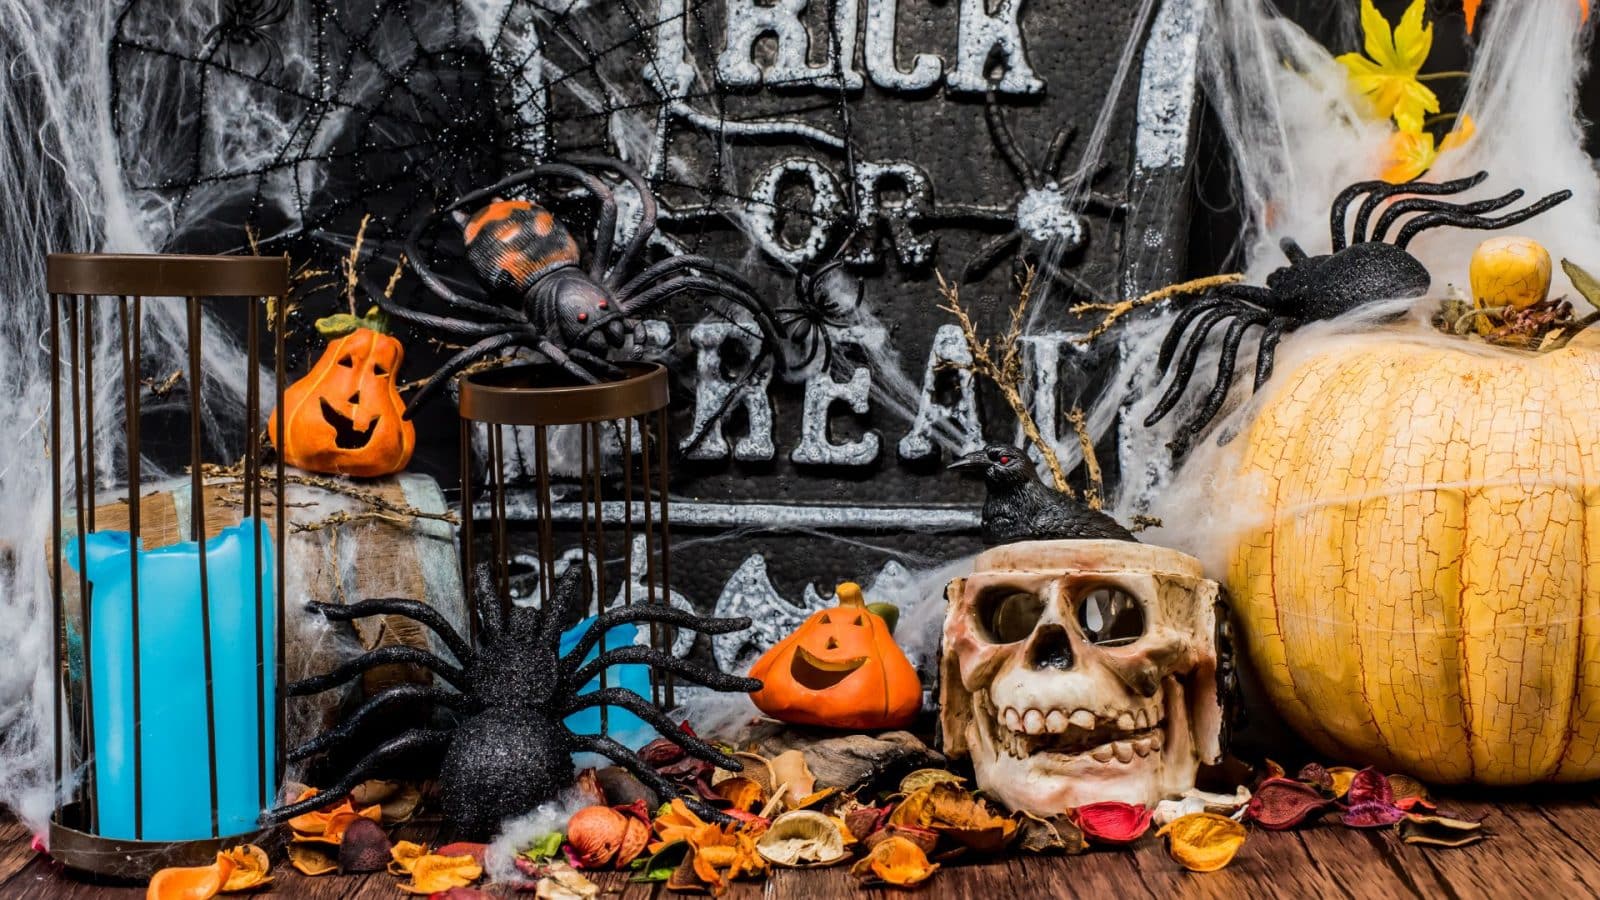 Spooktacular Halloween Decoration Ideas to Transform Your Home